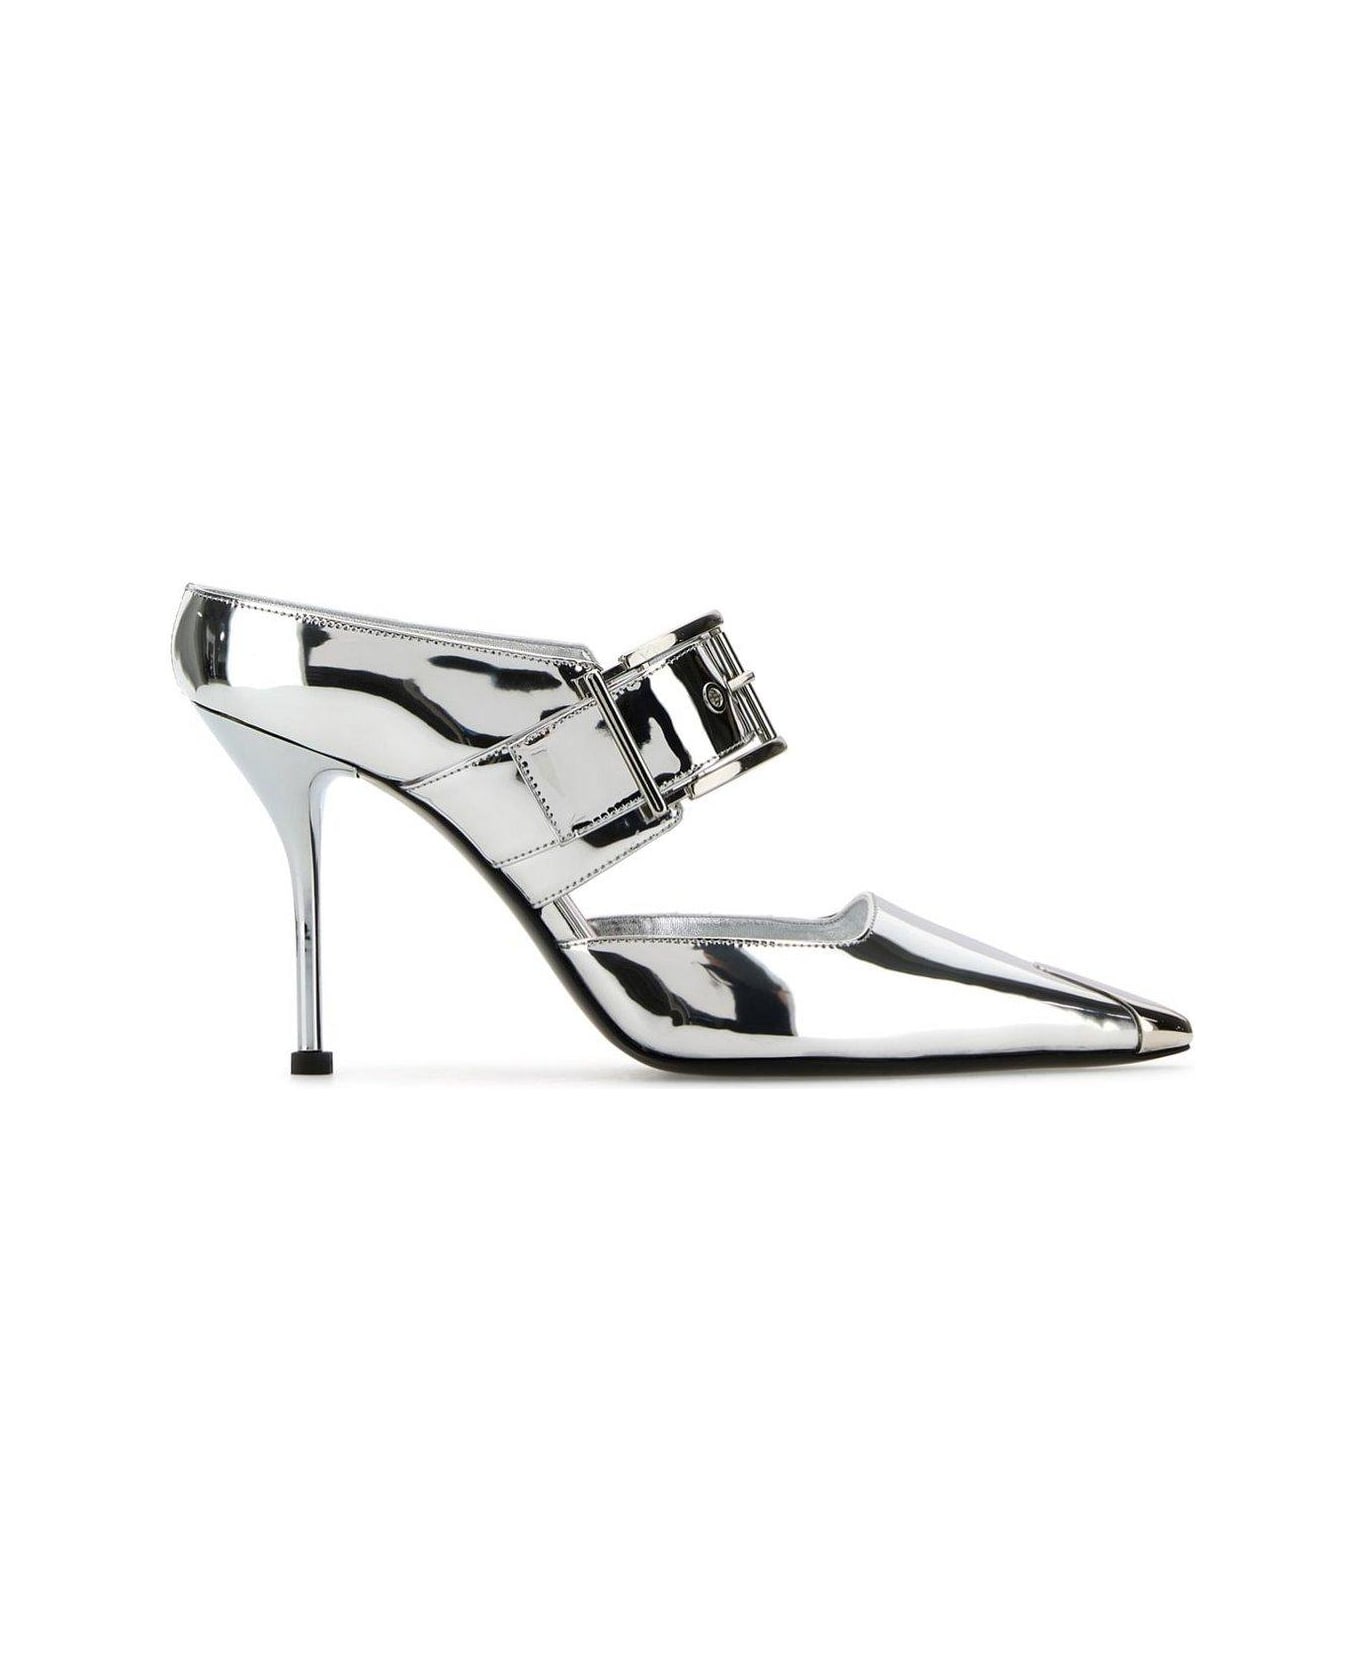 Alexander McQueen Pointed Toe Slip-on Pumps - SILVER サンダル